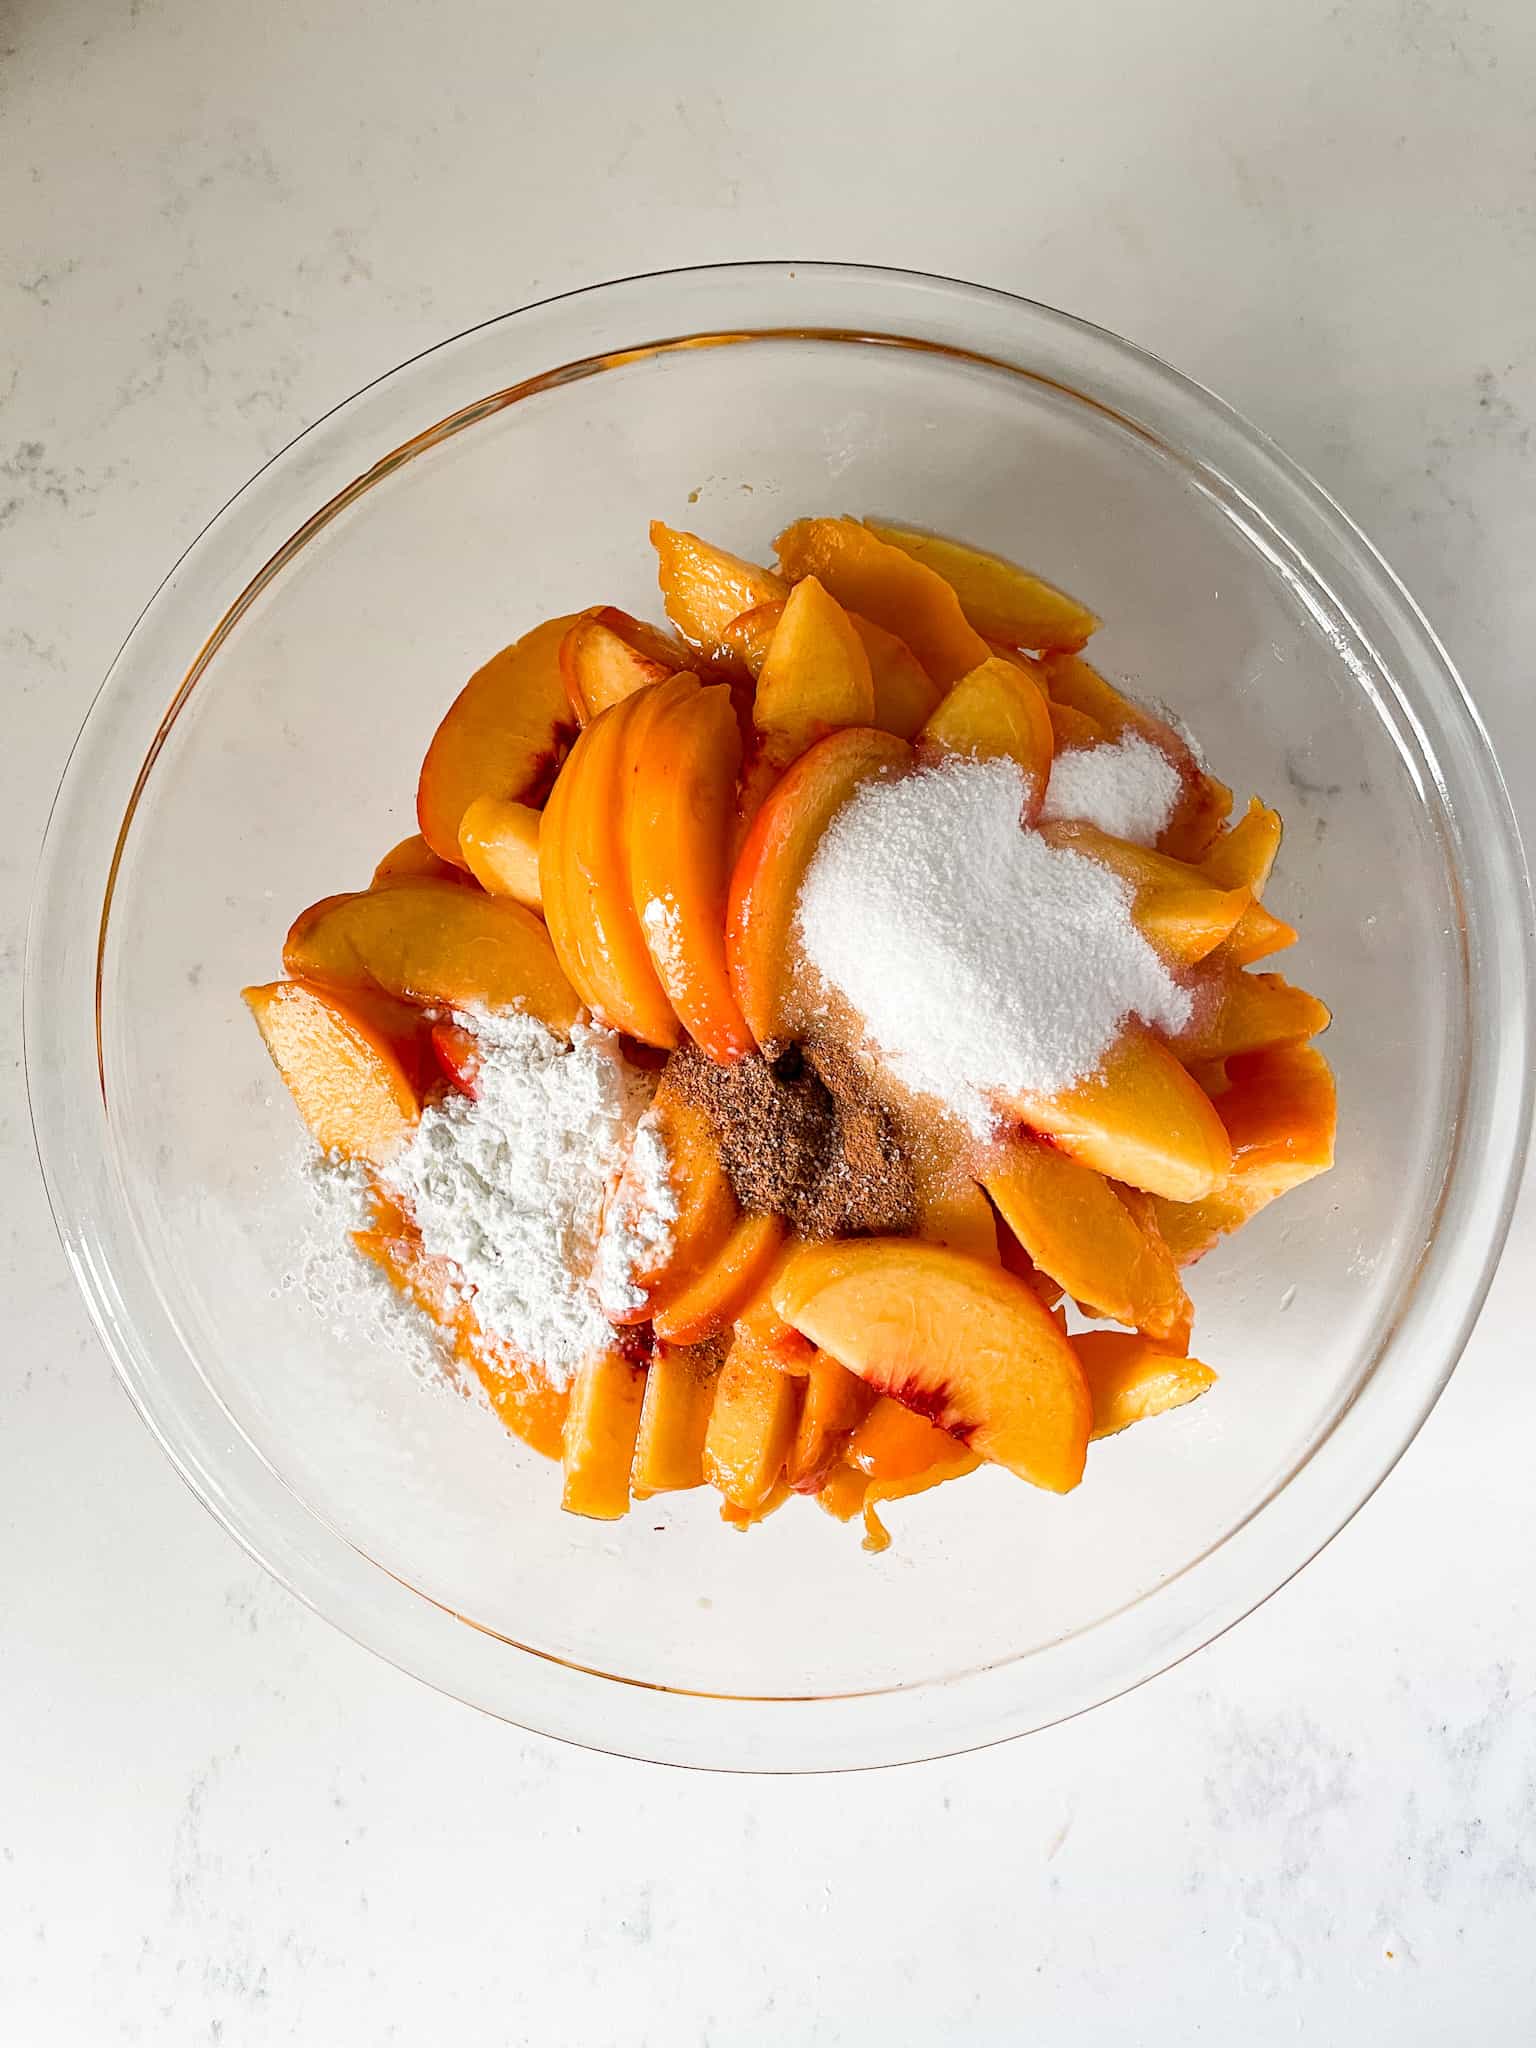 Sliced peaches in a bowl with sugar and spices on top.